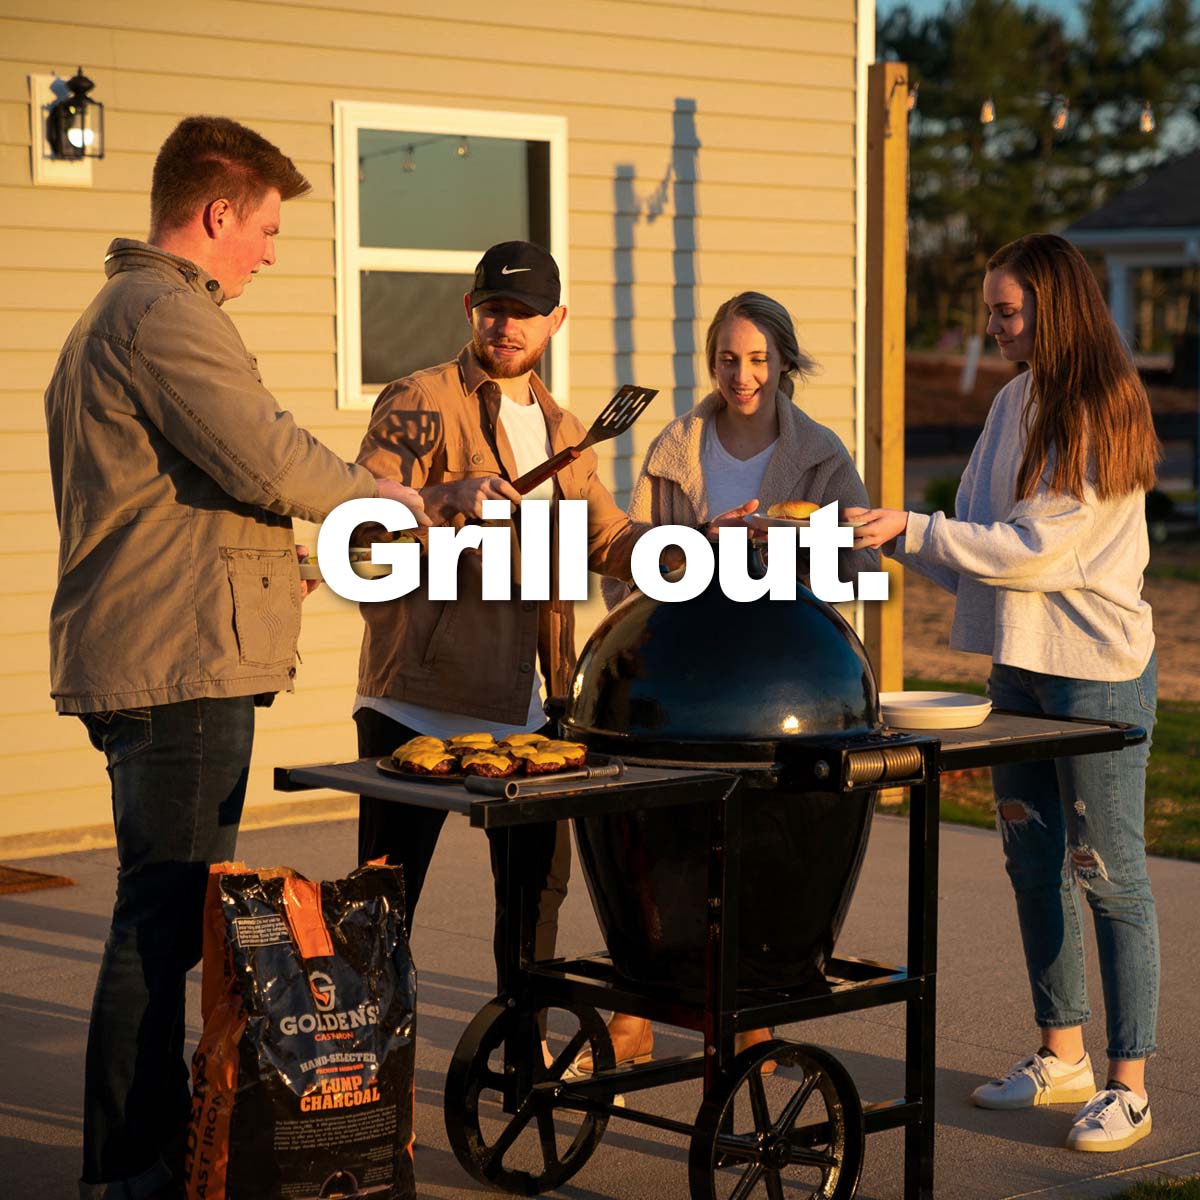 Cast Iron Kamado Grills Made in the USA